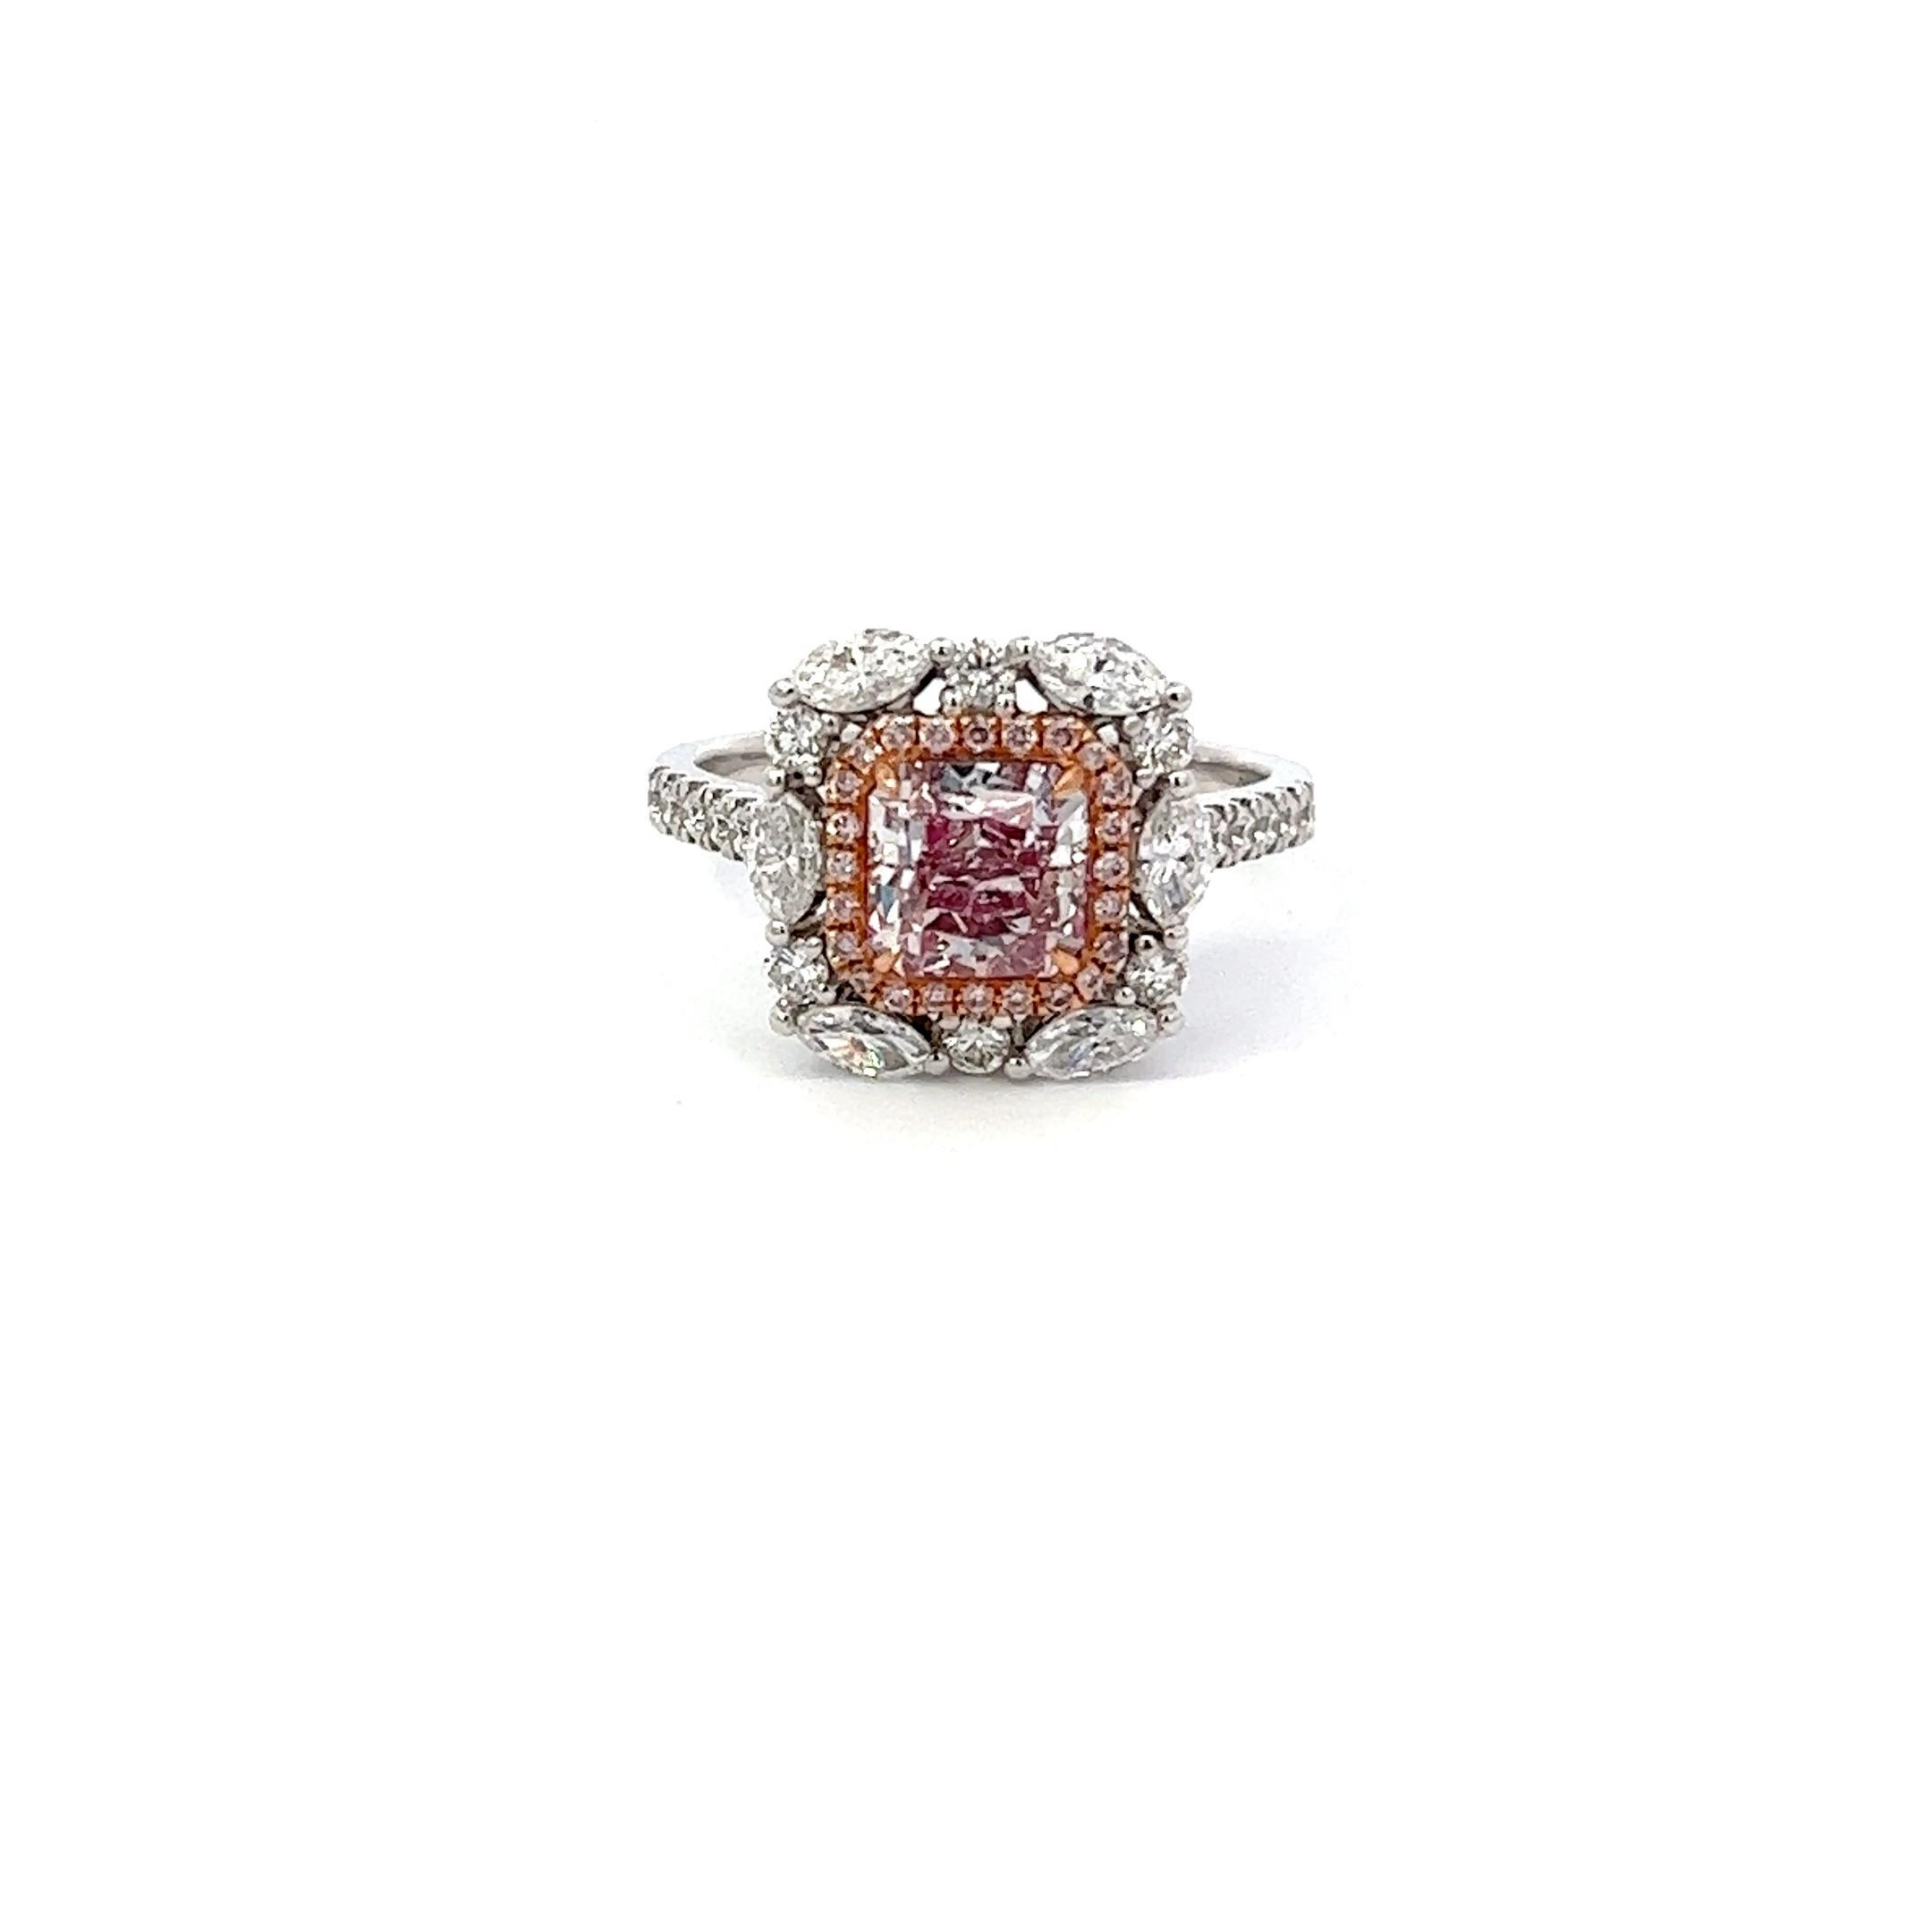 Center: 1.27ct Light Pinkish Brown Round-Cornered Square SI2 GIA# 2286576981
Setting: 18k White Gold 0.90ctw Pink and White Diamonds 

An extremely rare and stunning natural pink diamond center. Pink Diamonds account for less than 0.01% of all